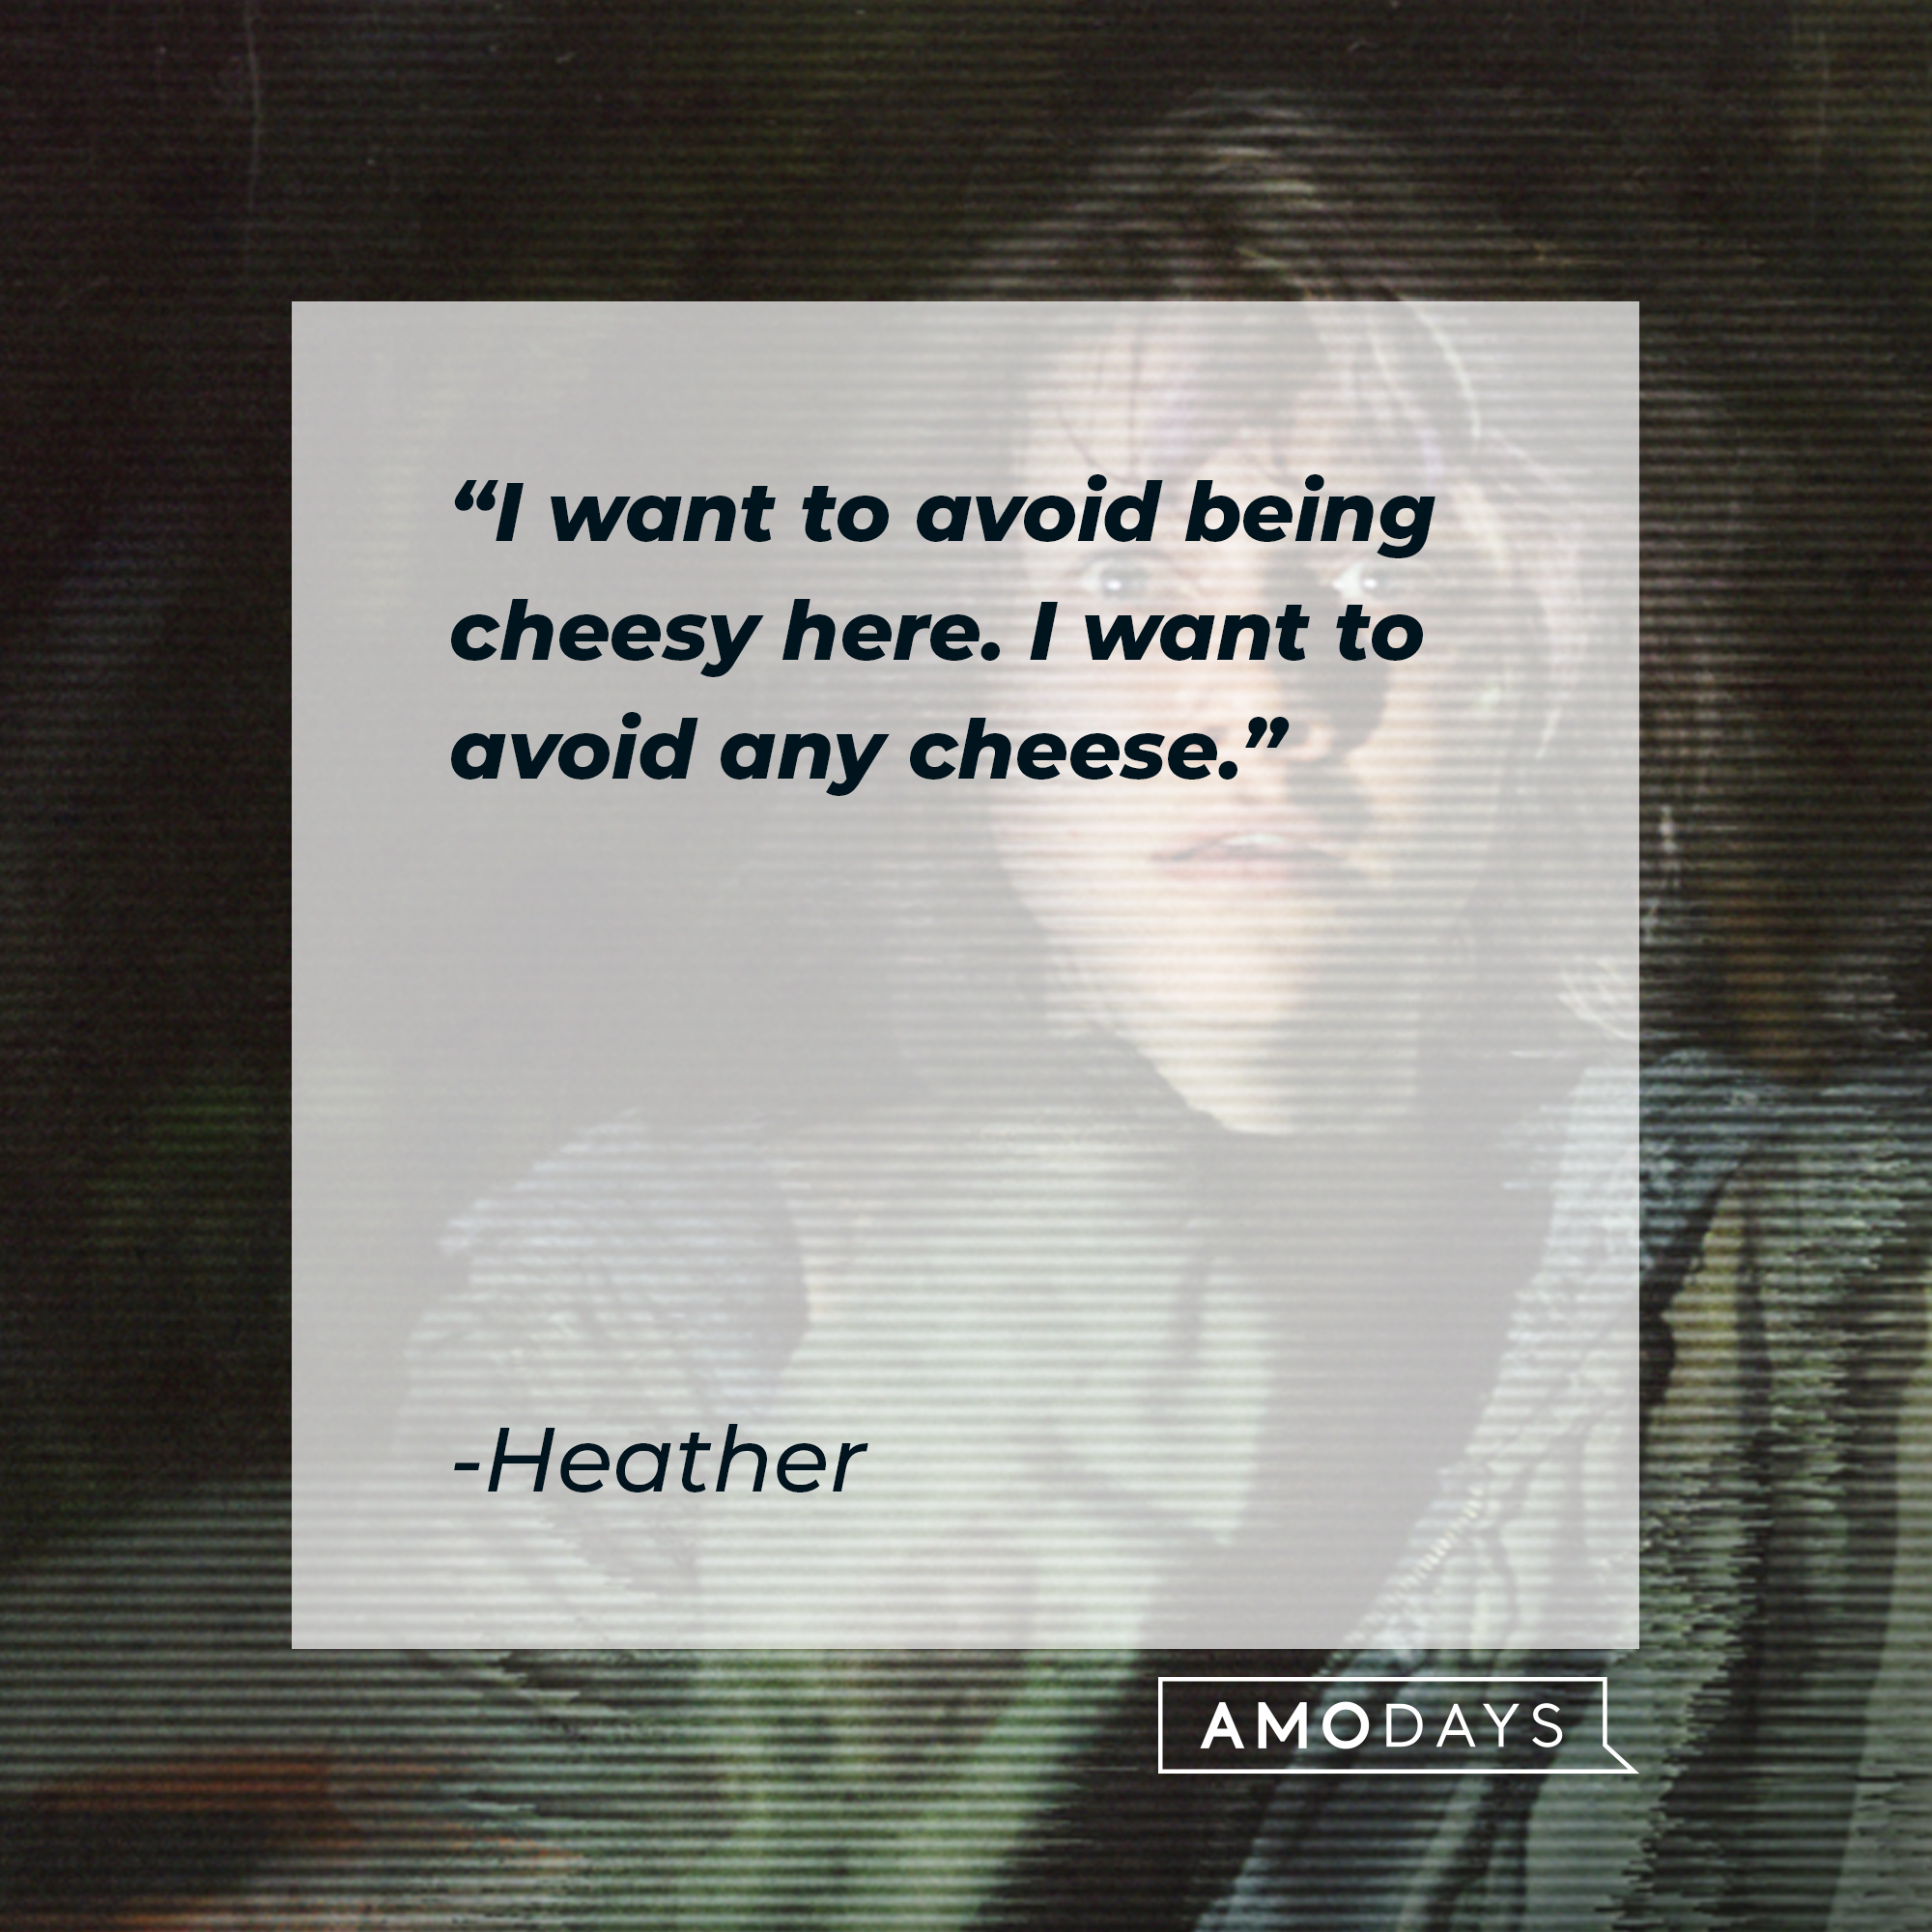 Heather's quote: “I want to avoid being cheesy here. I want to avoid any cheese.” | Source: facebook.com/blairwitchmovie